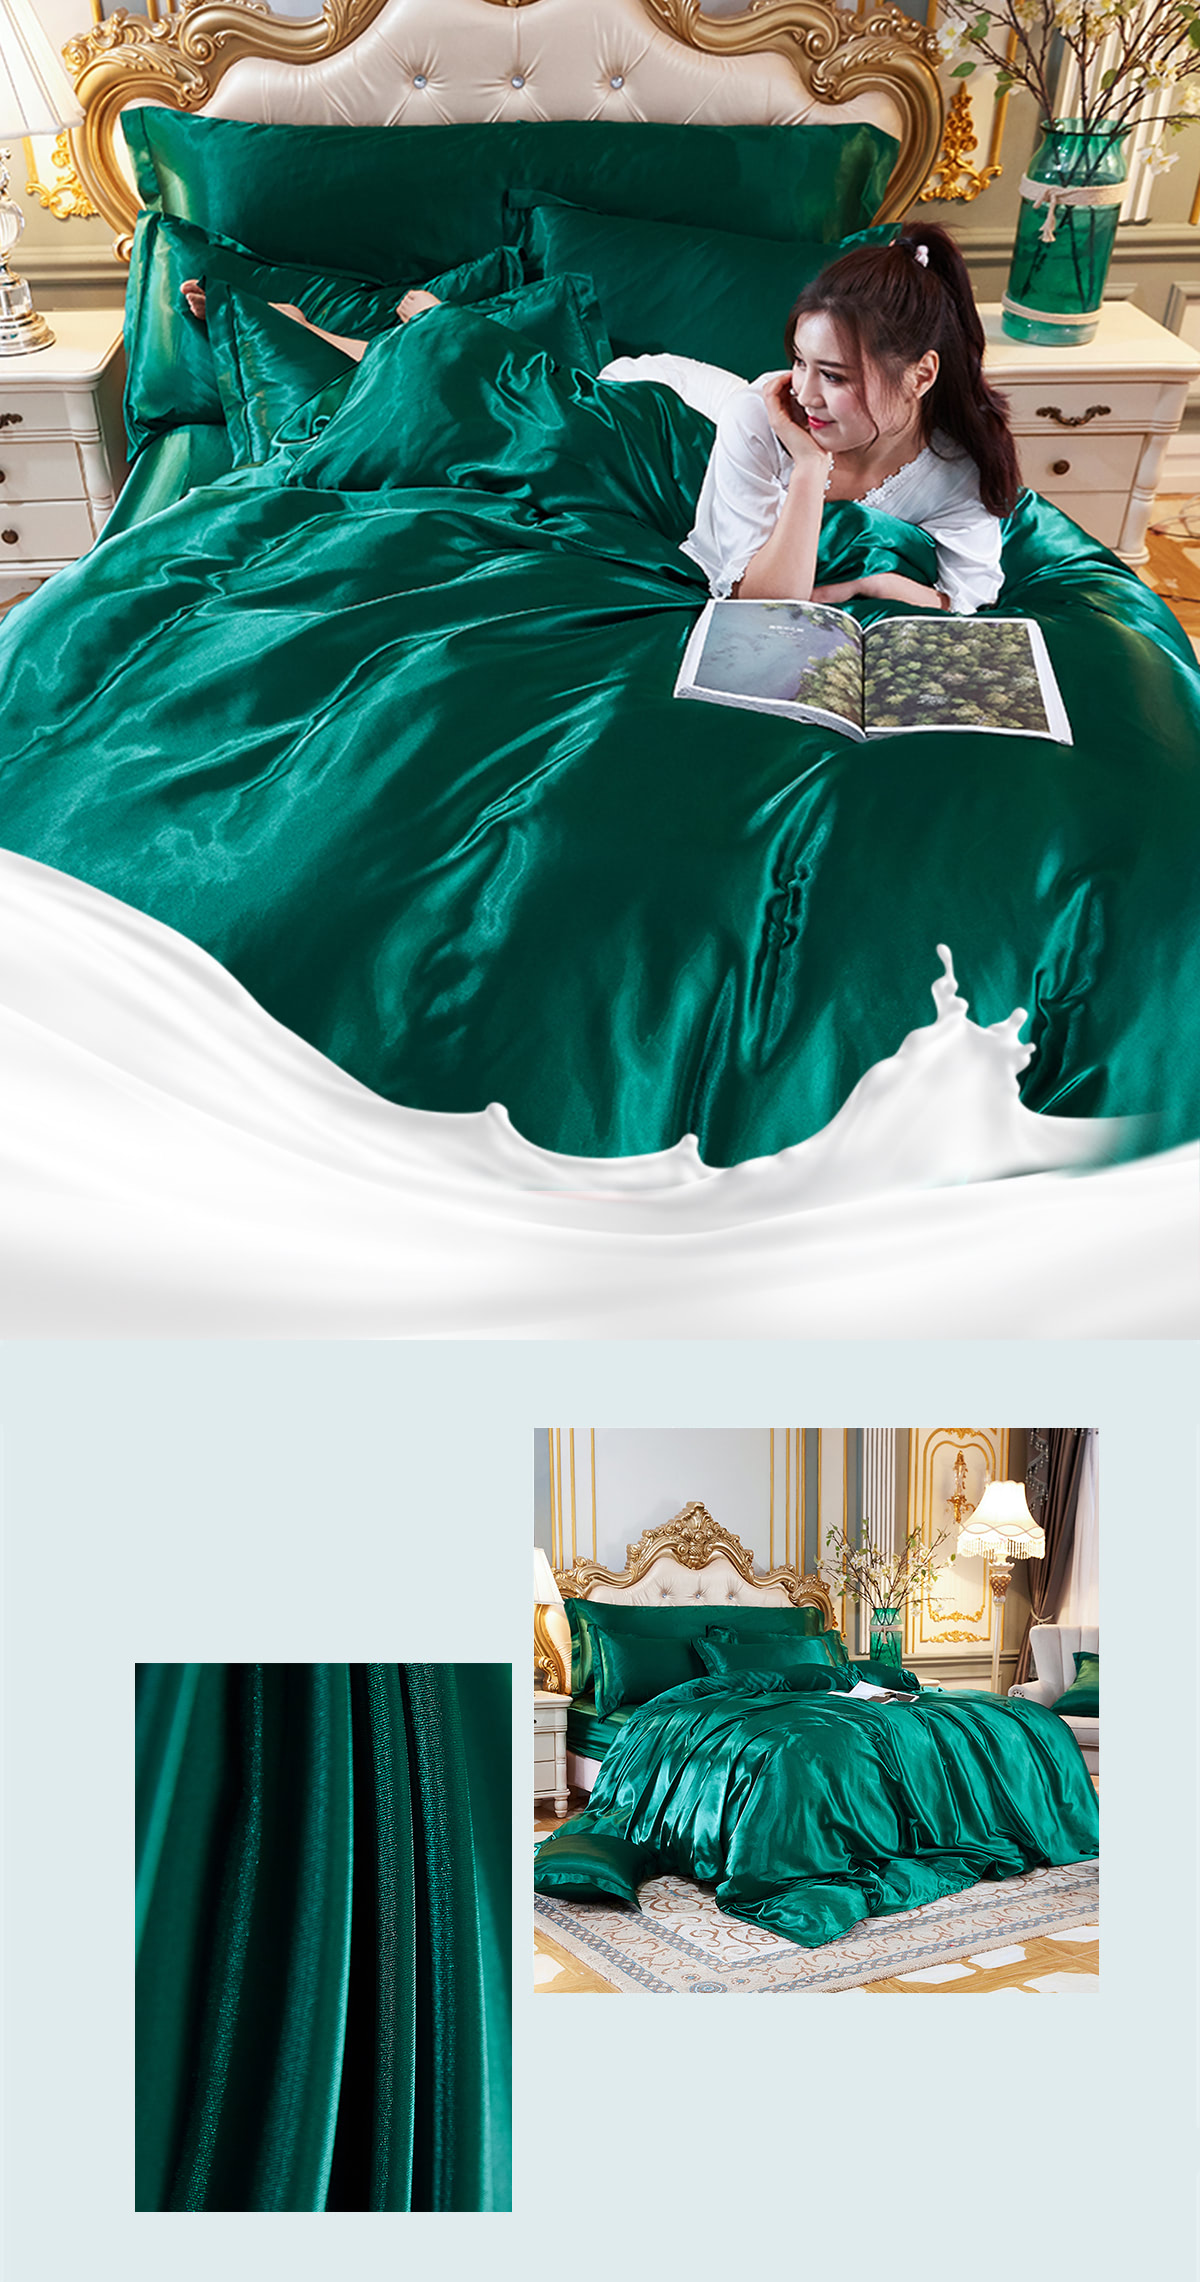 4-Piece-Soft-Silky-Satin-Solid-Color-Bed-Sheet-Pillowcases-Set13.jpg